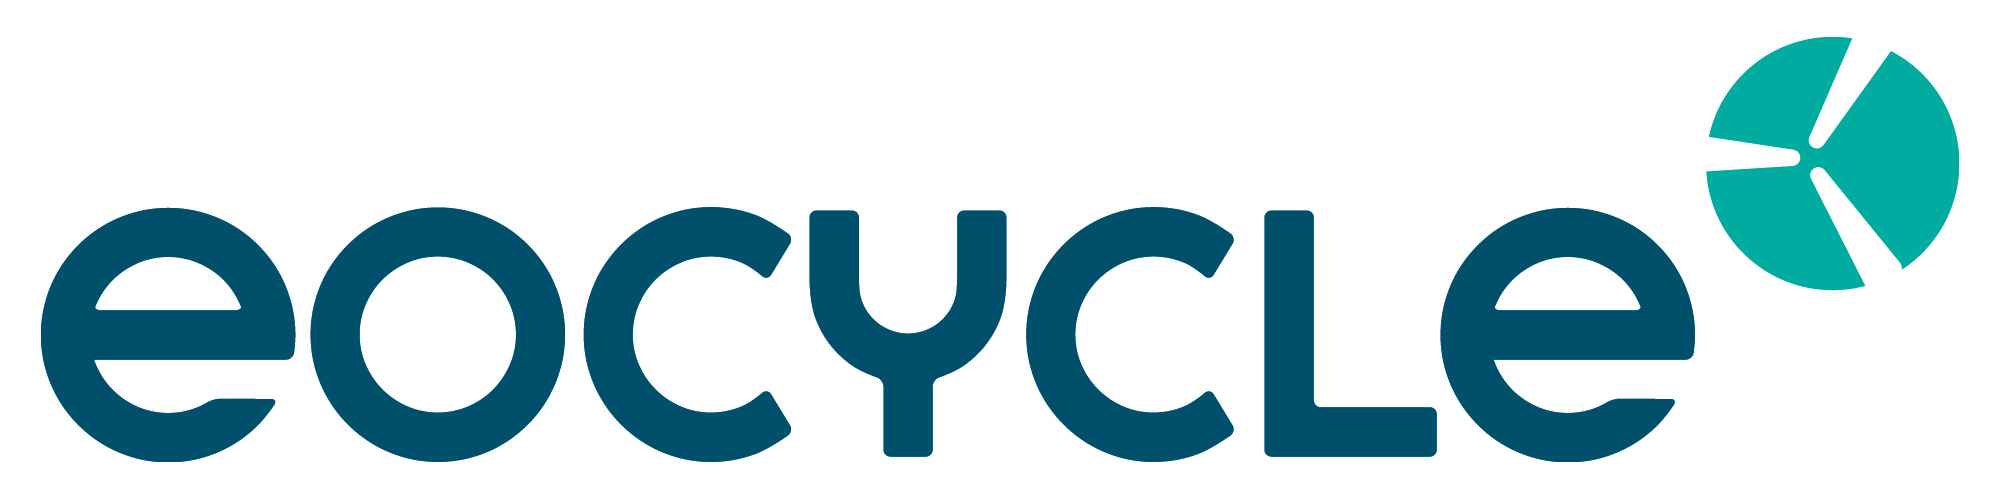 Eocycle integrates the development, manufacture, and commercialization of wind turbines